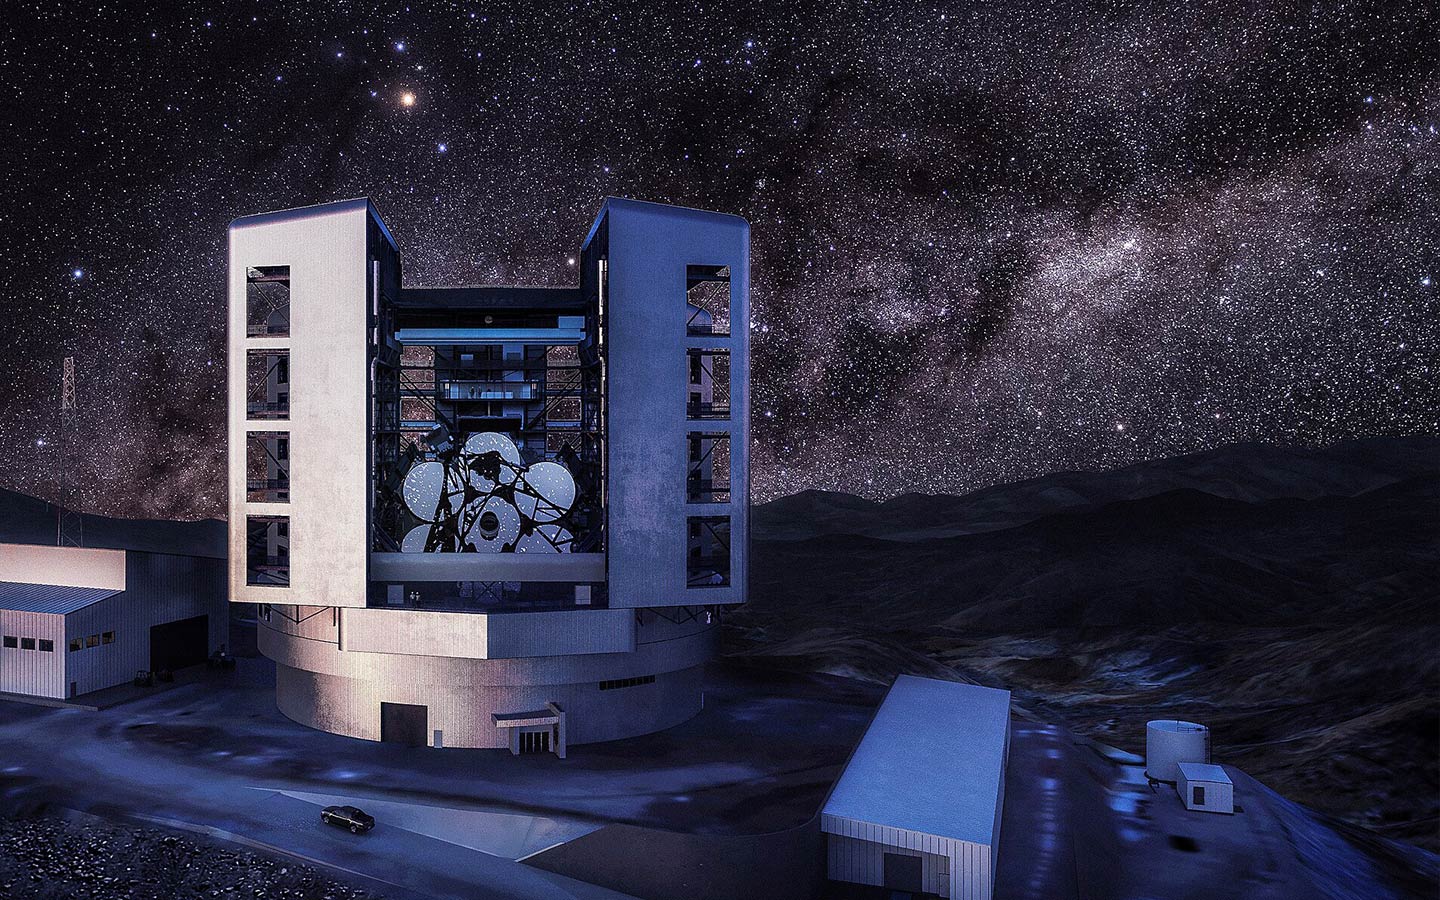 The Giant Magellan Telescope Project